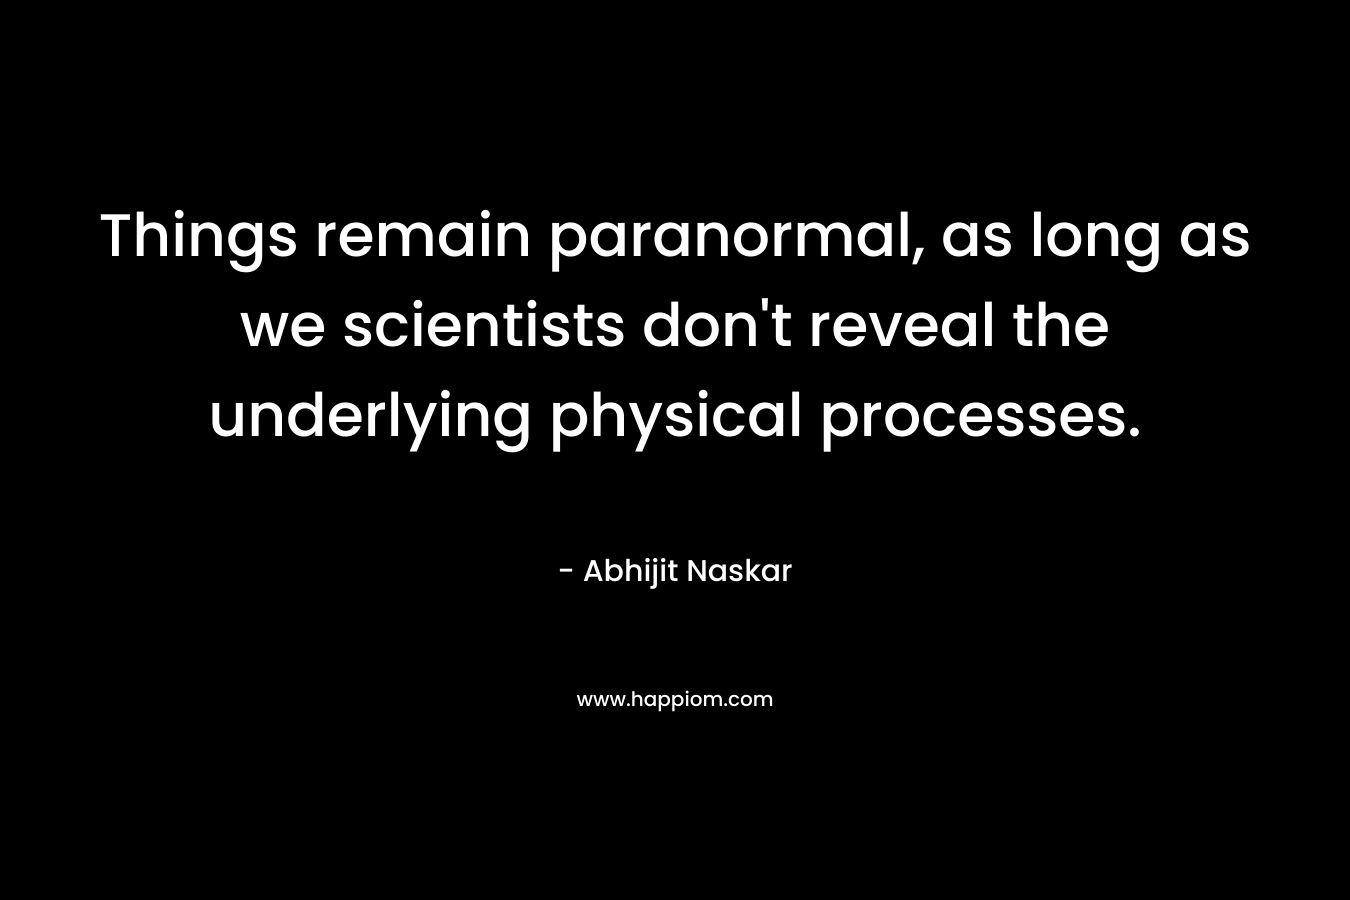 Things remain paranormal, as long as we scientists don't reveal the underlying physical processes.